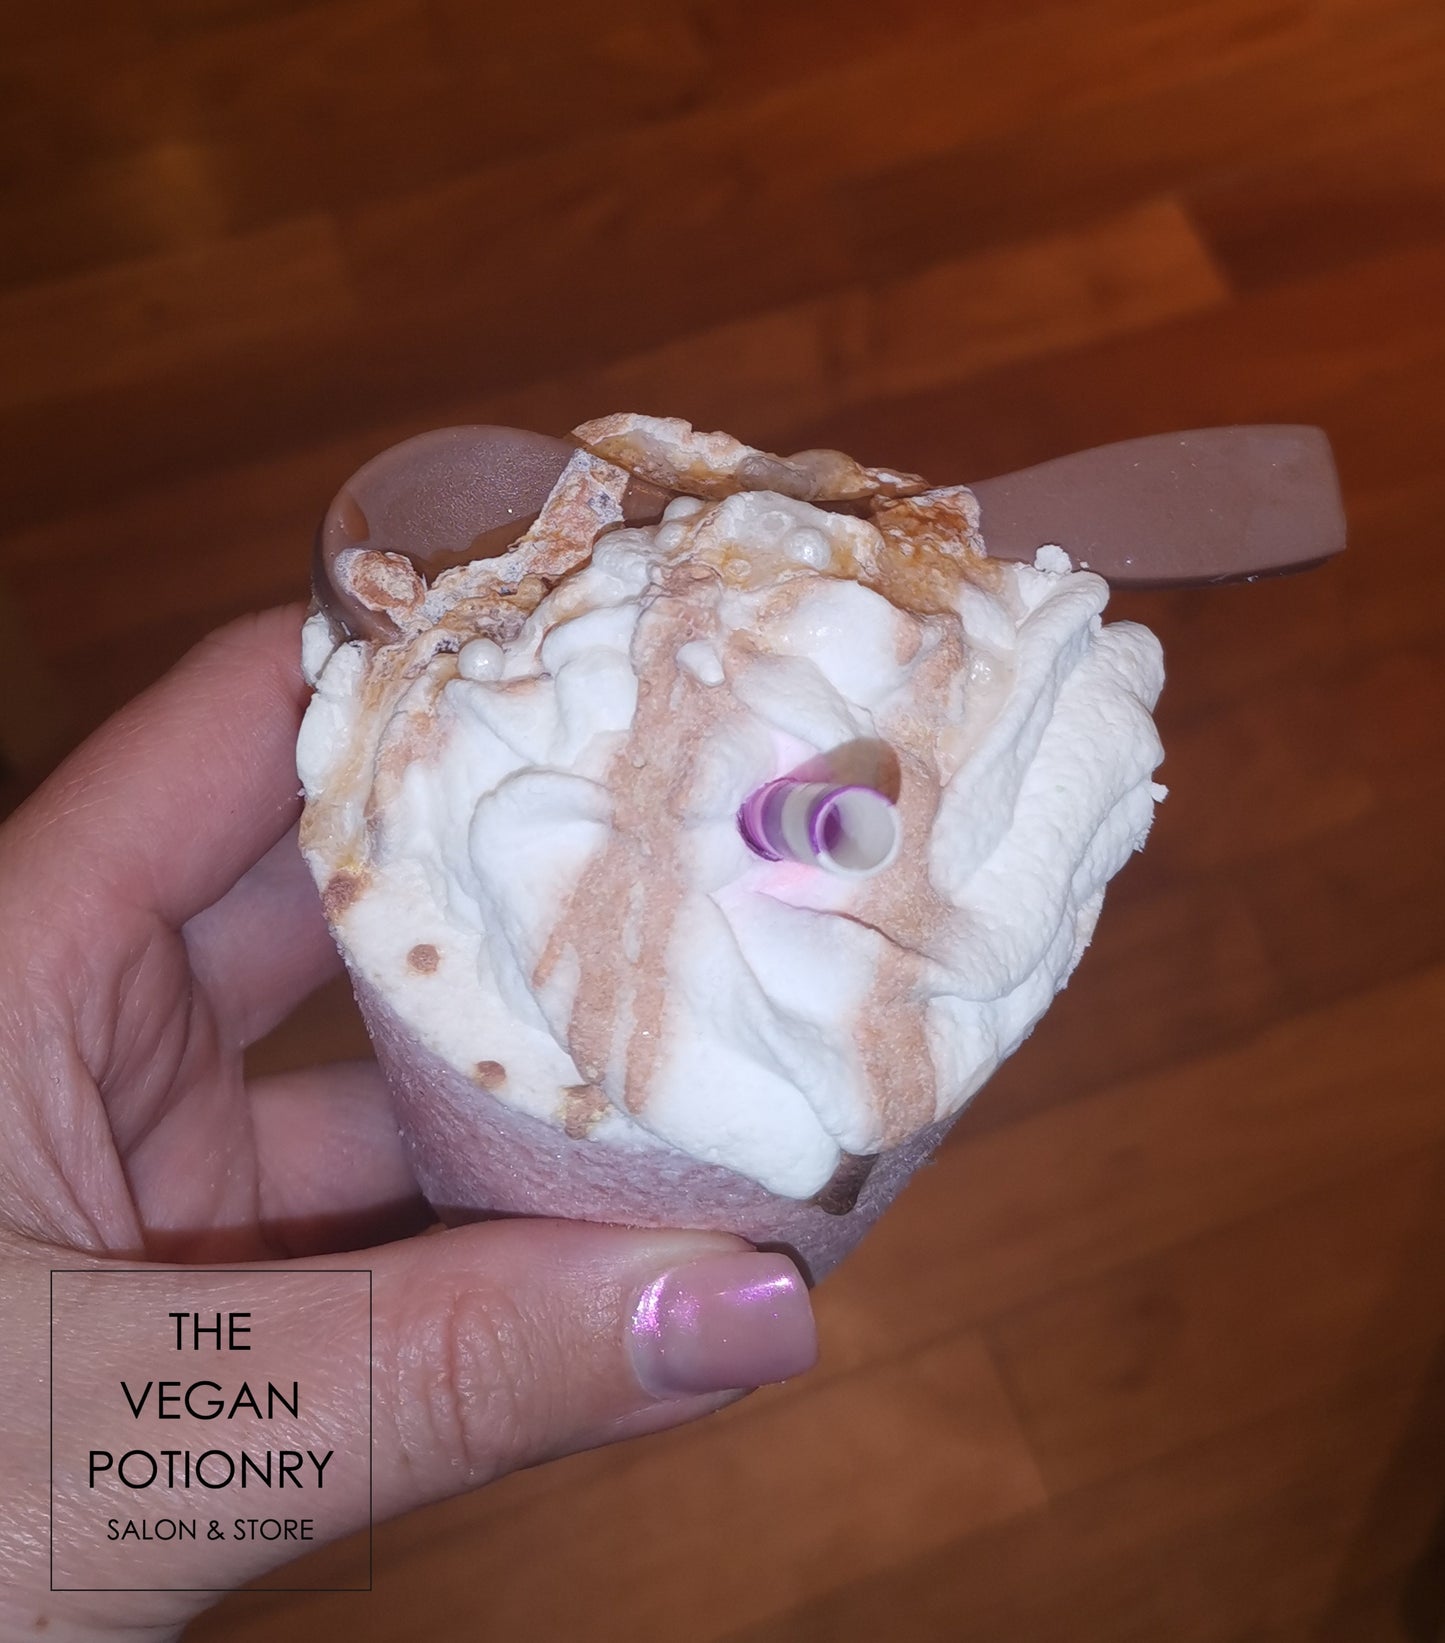 Coffee Latte, Espresso & Frappuccino Bubbling Bath Bombs with toys inside | The Vegan Potionry |